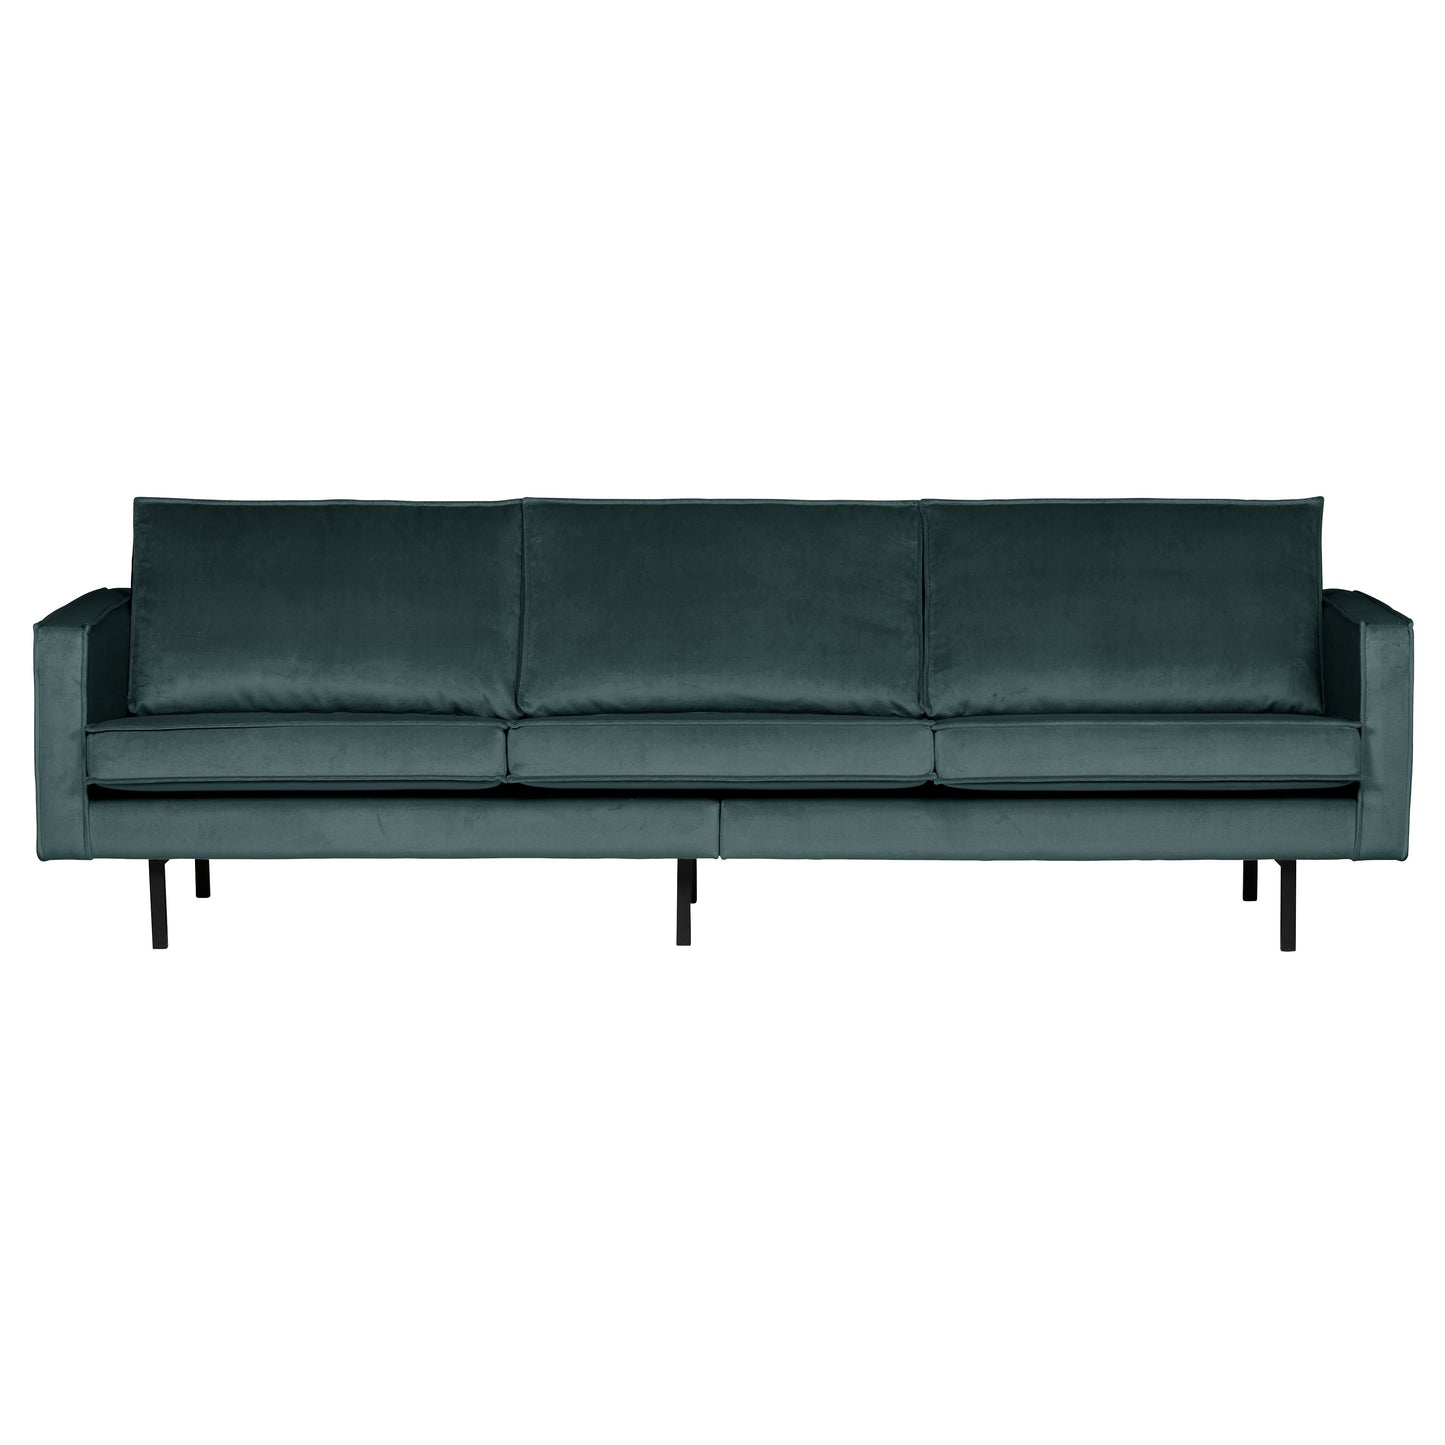 BEPUREHOME | Rodeo Sofa - 3-sits soffa, Velour Teal